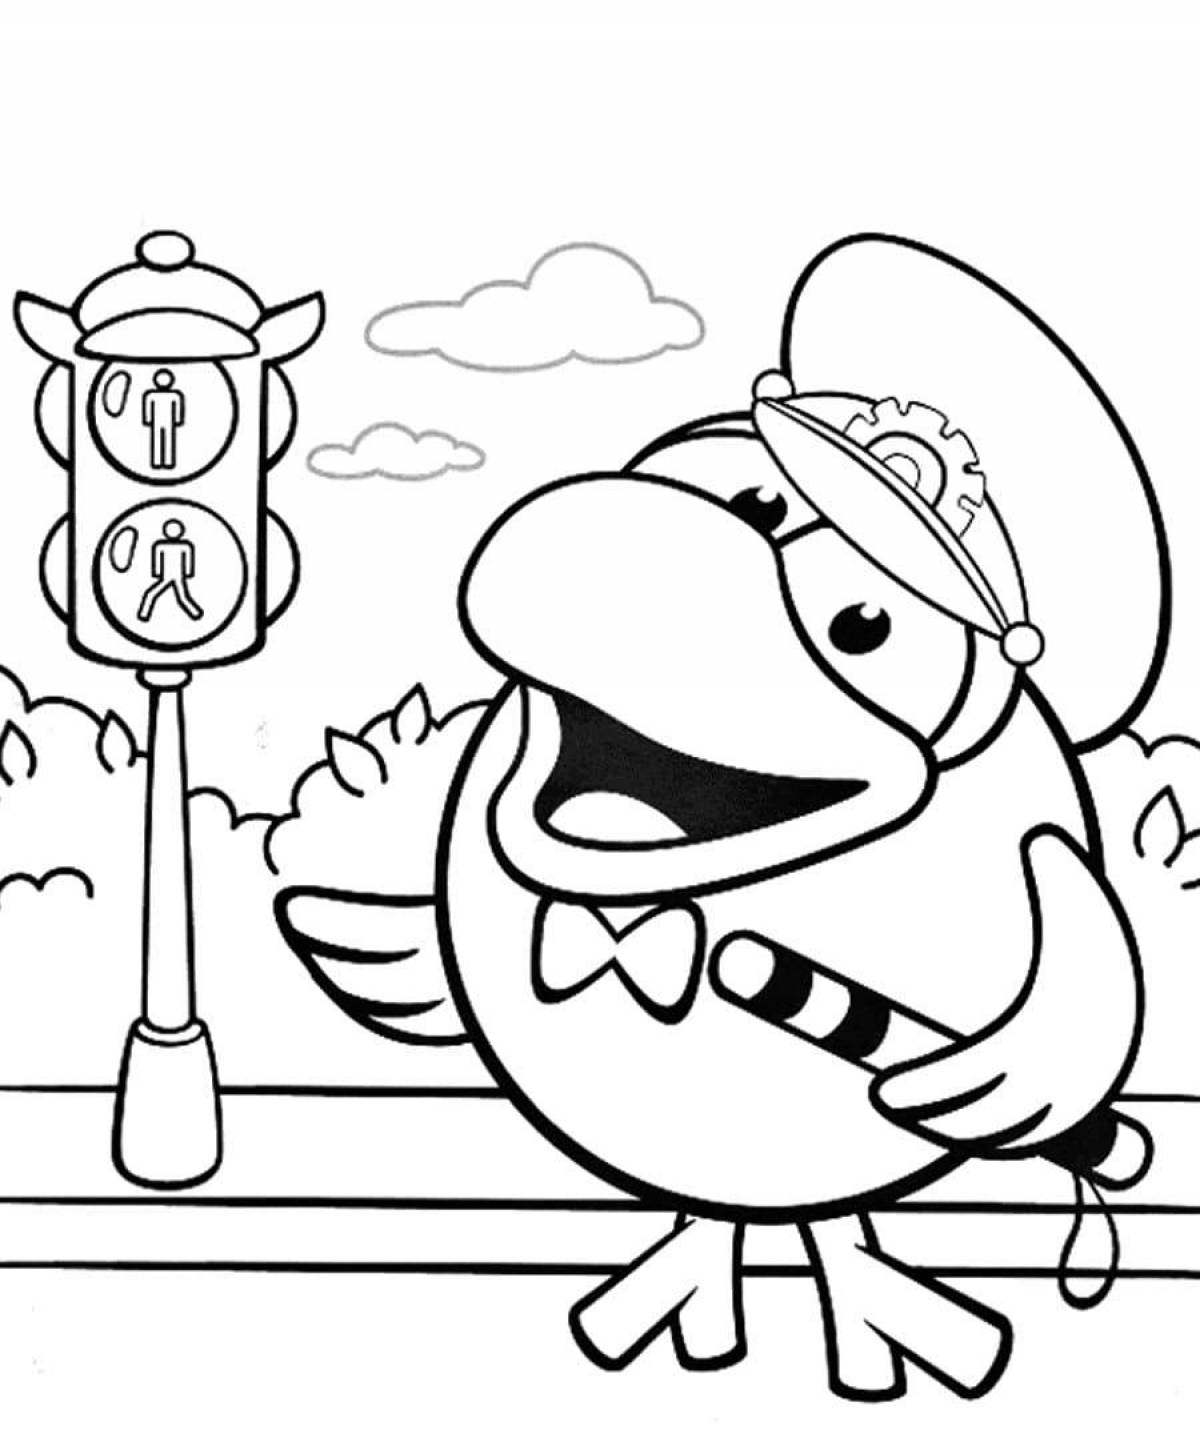 Shining rules of the road coloring page